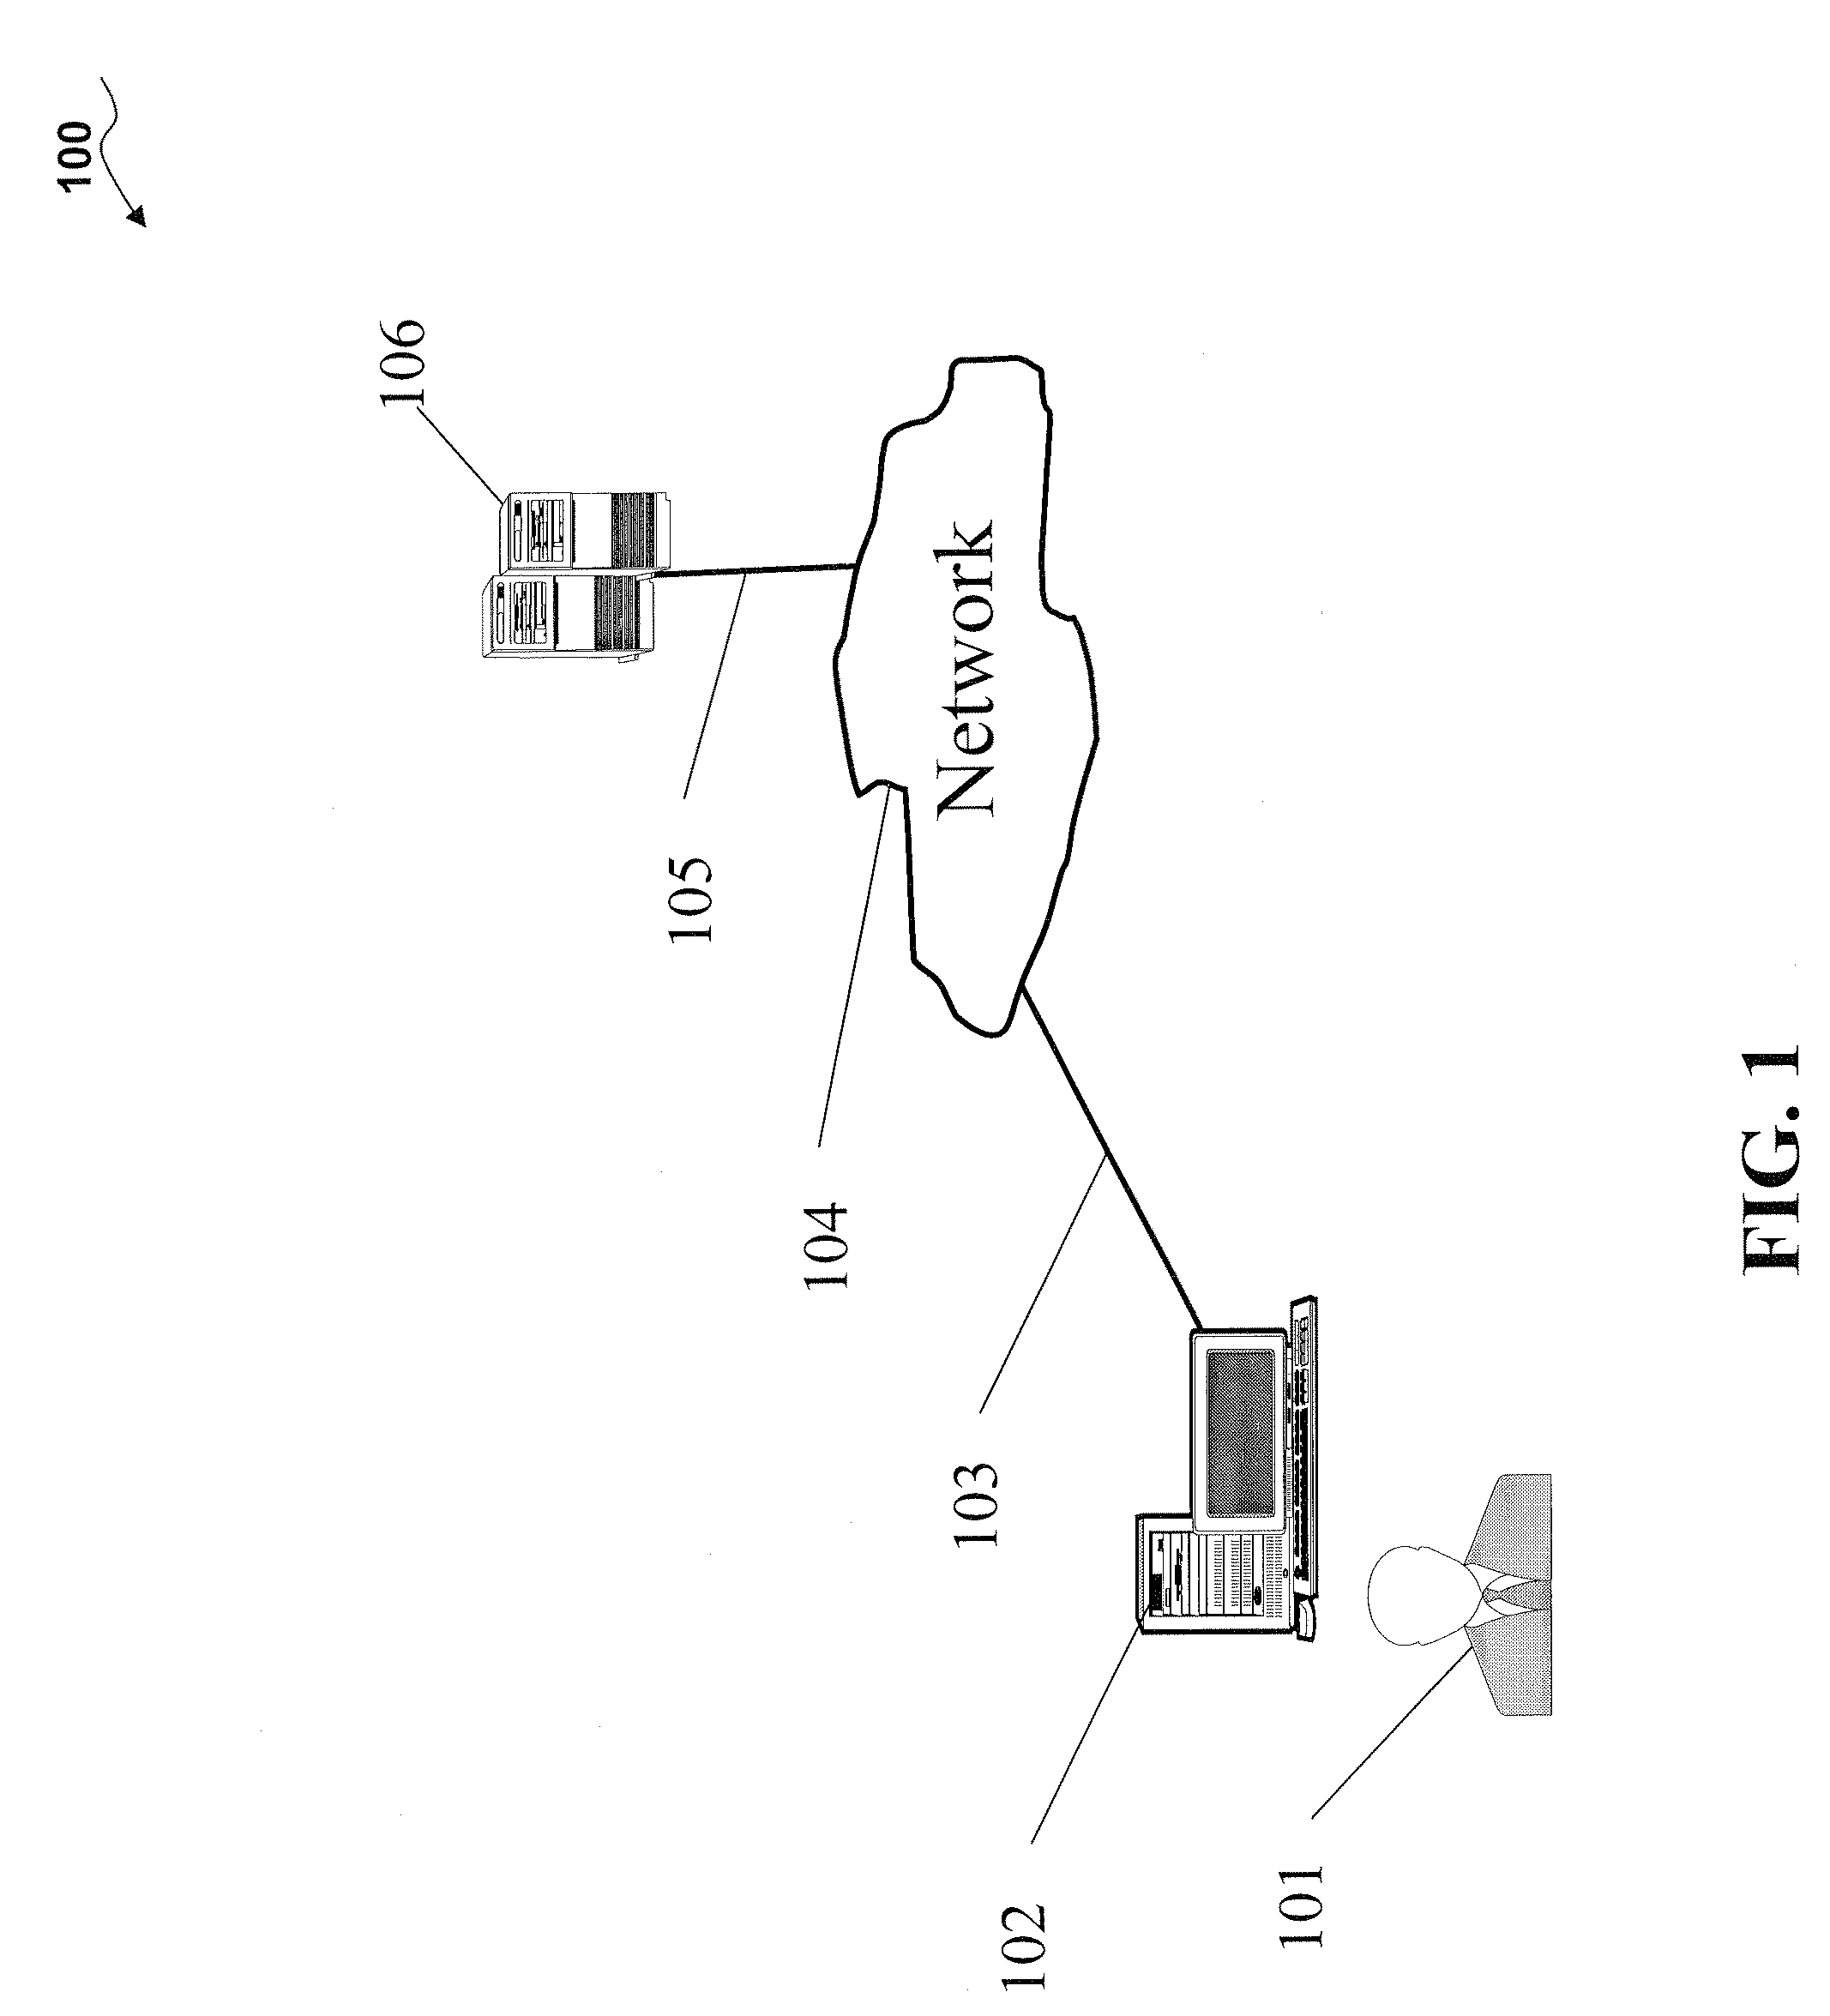 System and method for knowledge navigation and discovery utilizing a graphical user interface